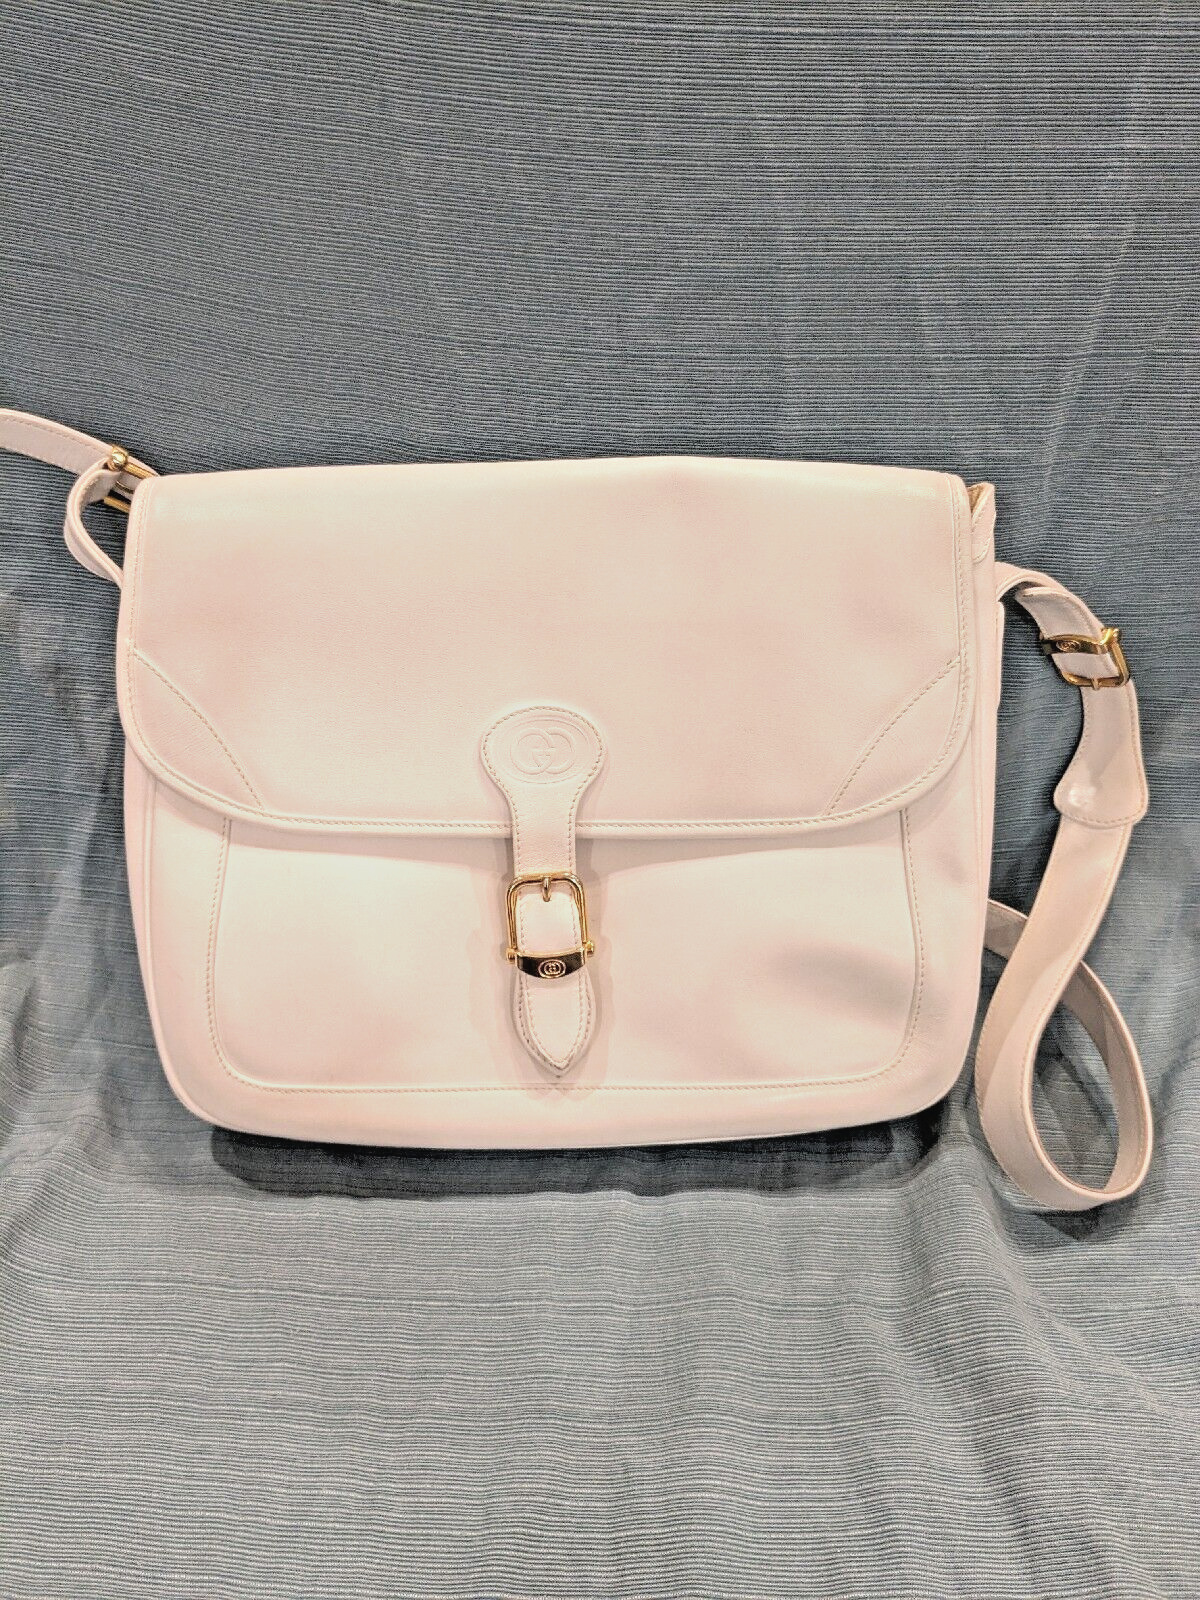 Stunning Condition Vintage GUCCI Italy white leather GG Shoulder Bag 12x9.5x3.5